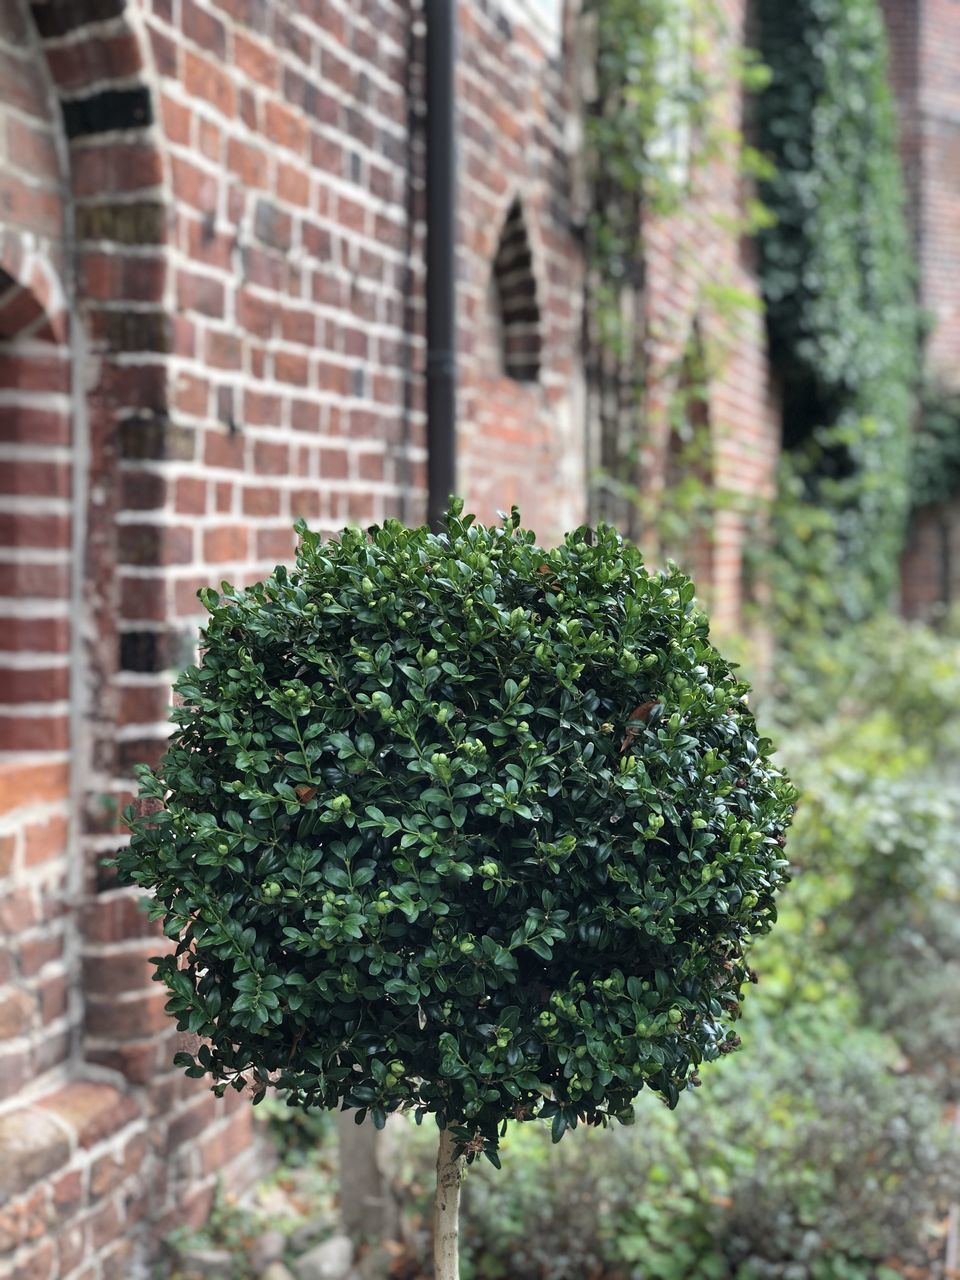 CLOSE-UP OF PLANT AGAINST BRICK WALL